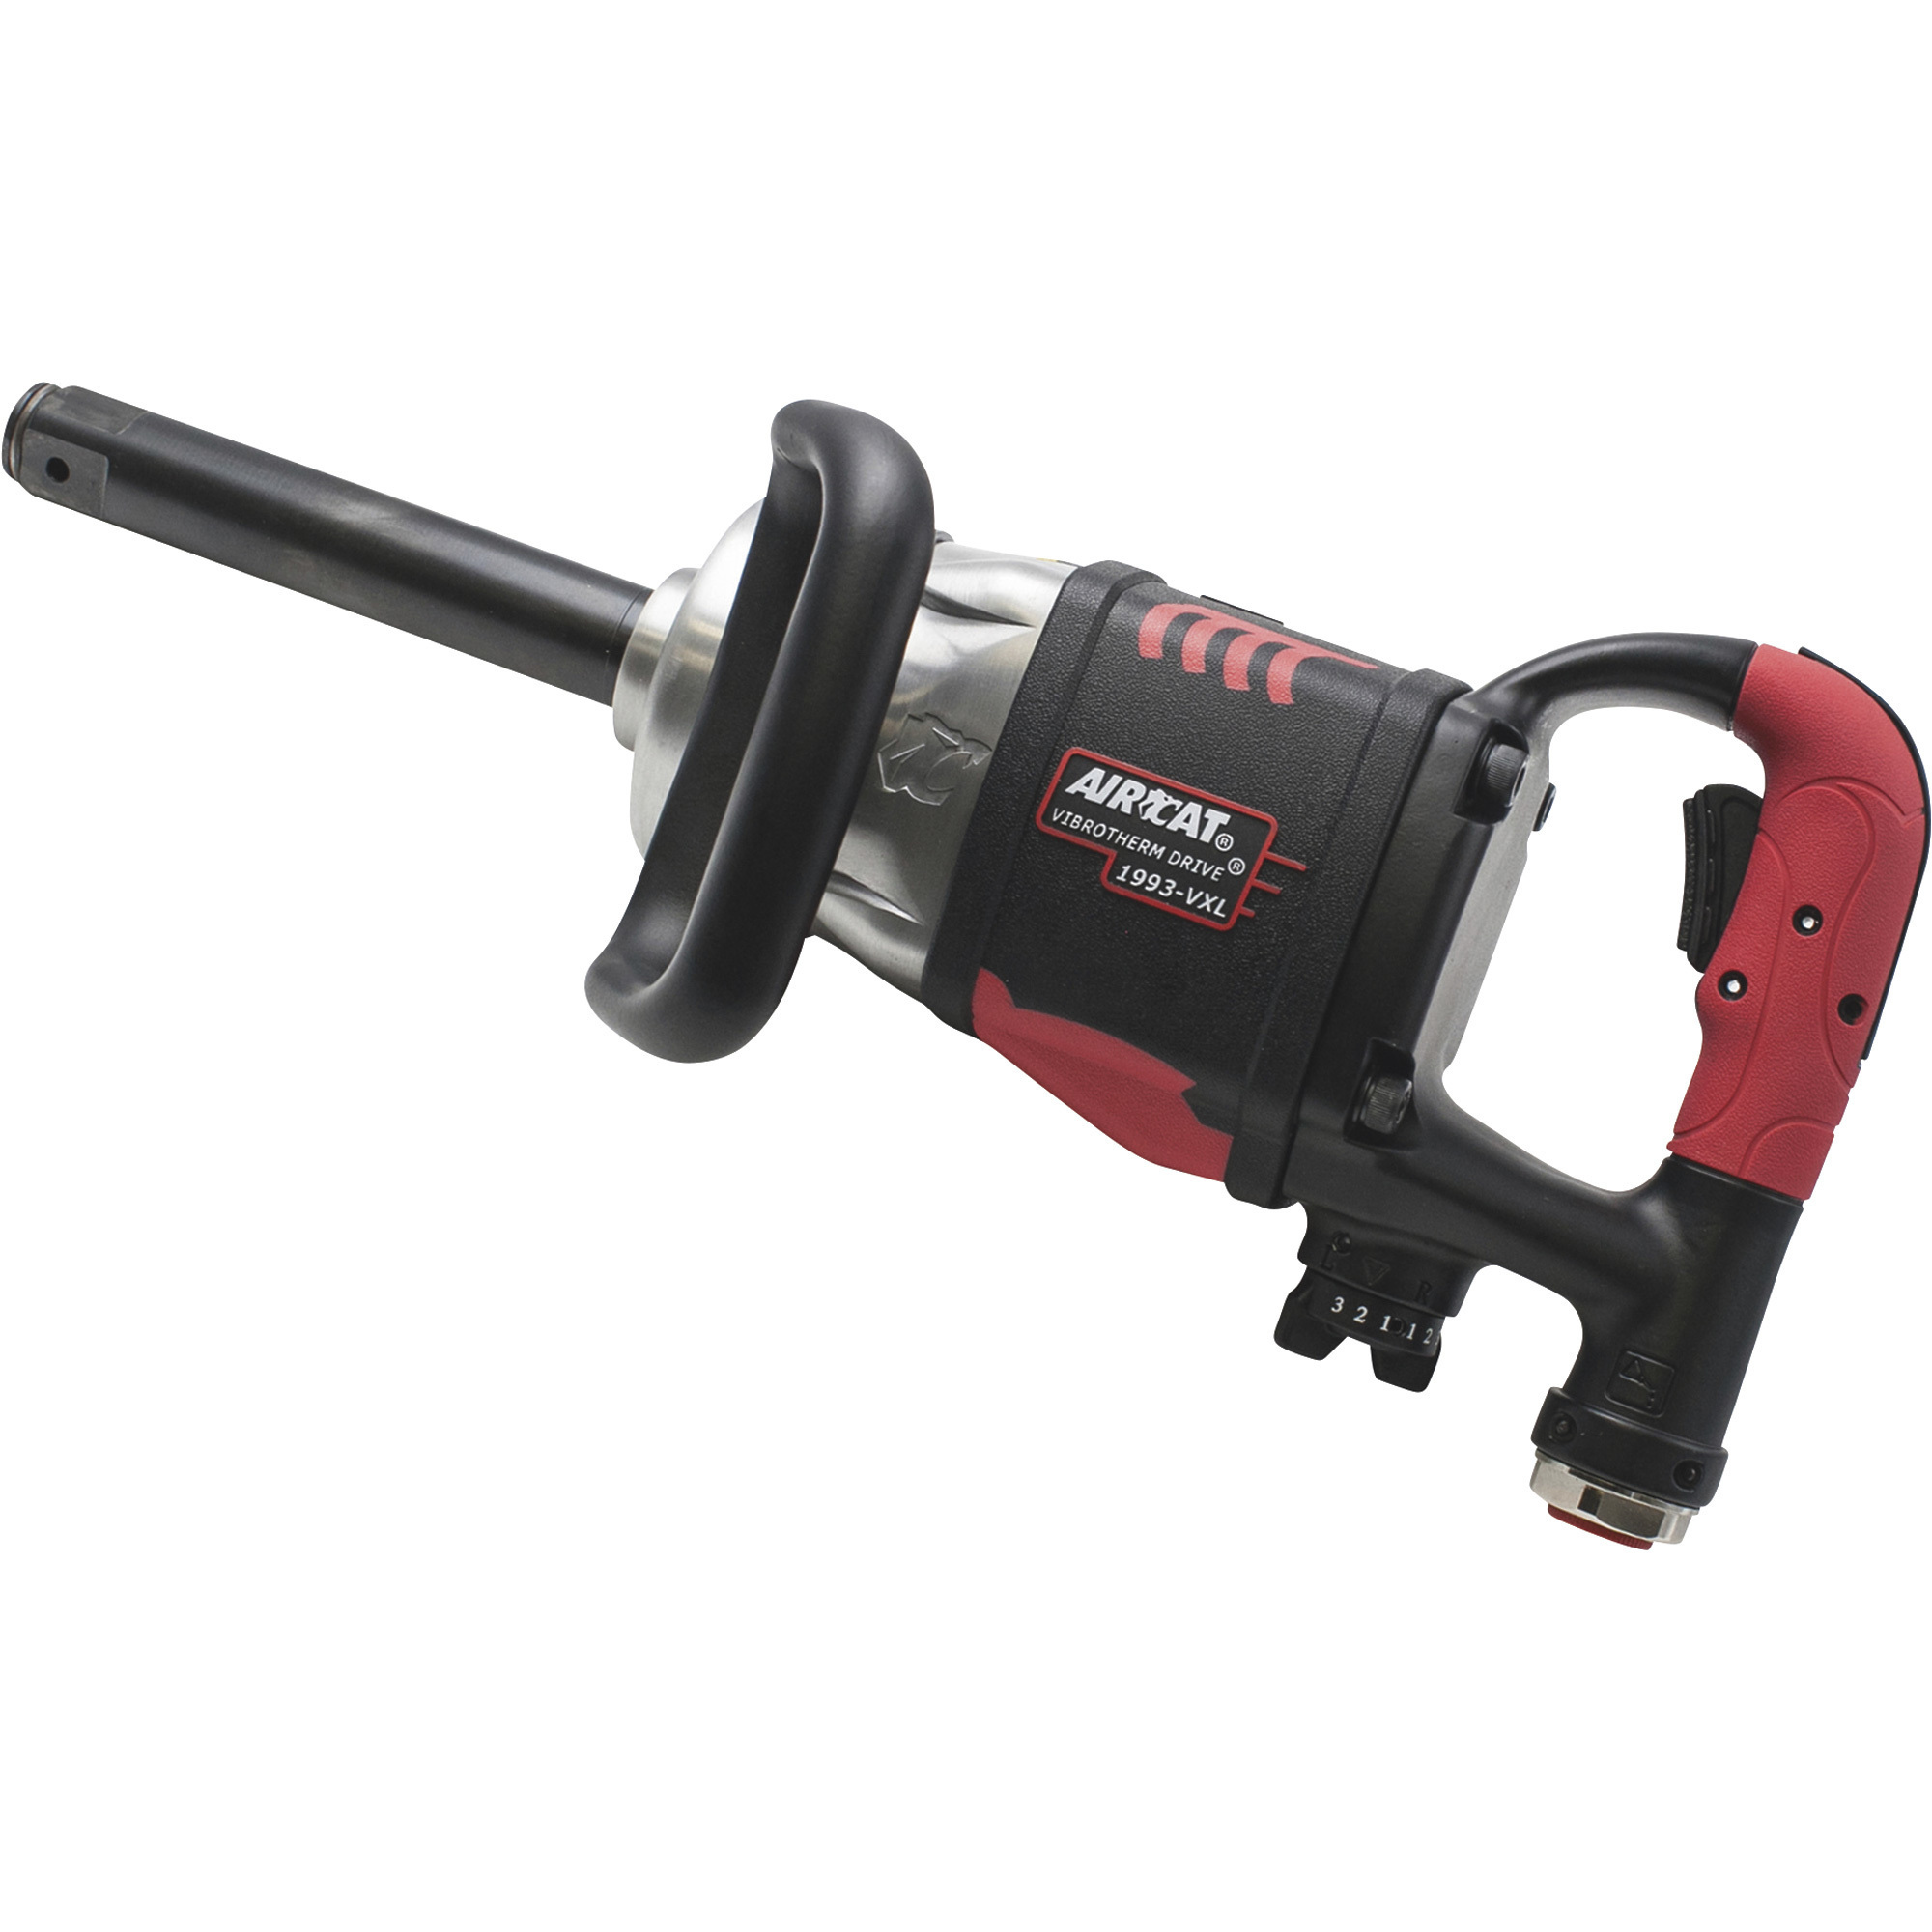 AIRCAT Vibrotherm Drive Composite Air Impact Wrench with 7Inch Anvil, 1Inch Drive, 2100 Ft./Lbs. Max. Torque, Model 1993-1-VXL